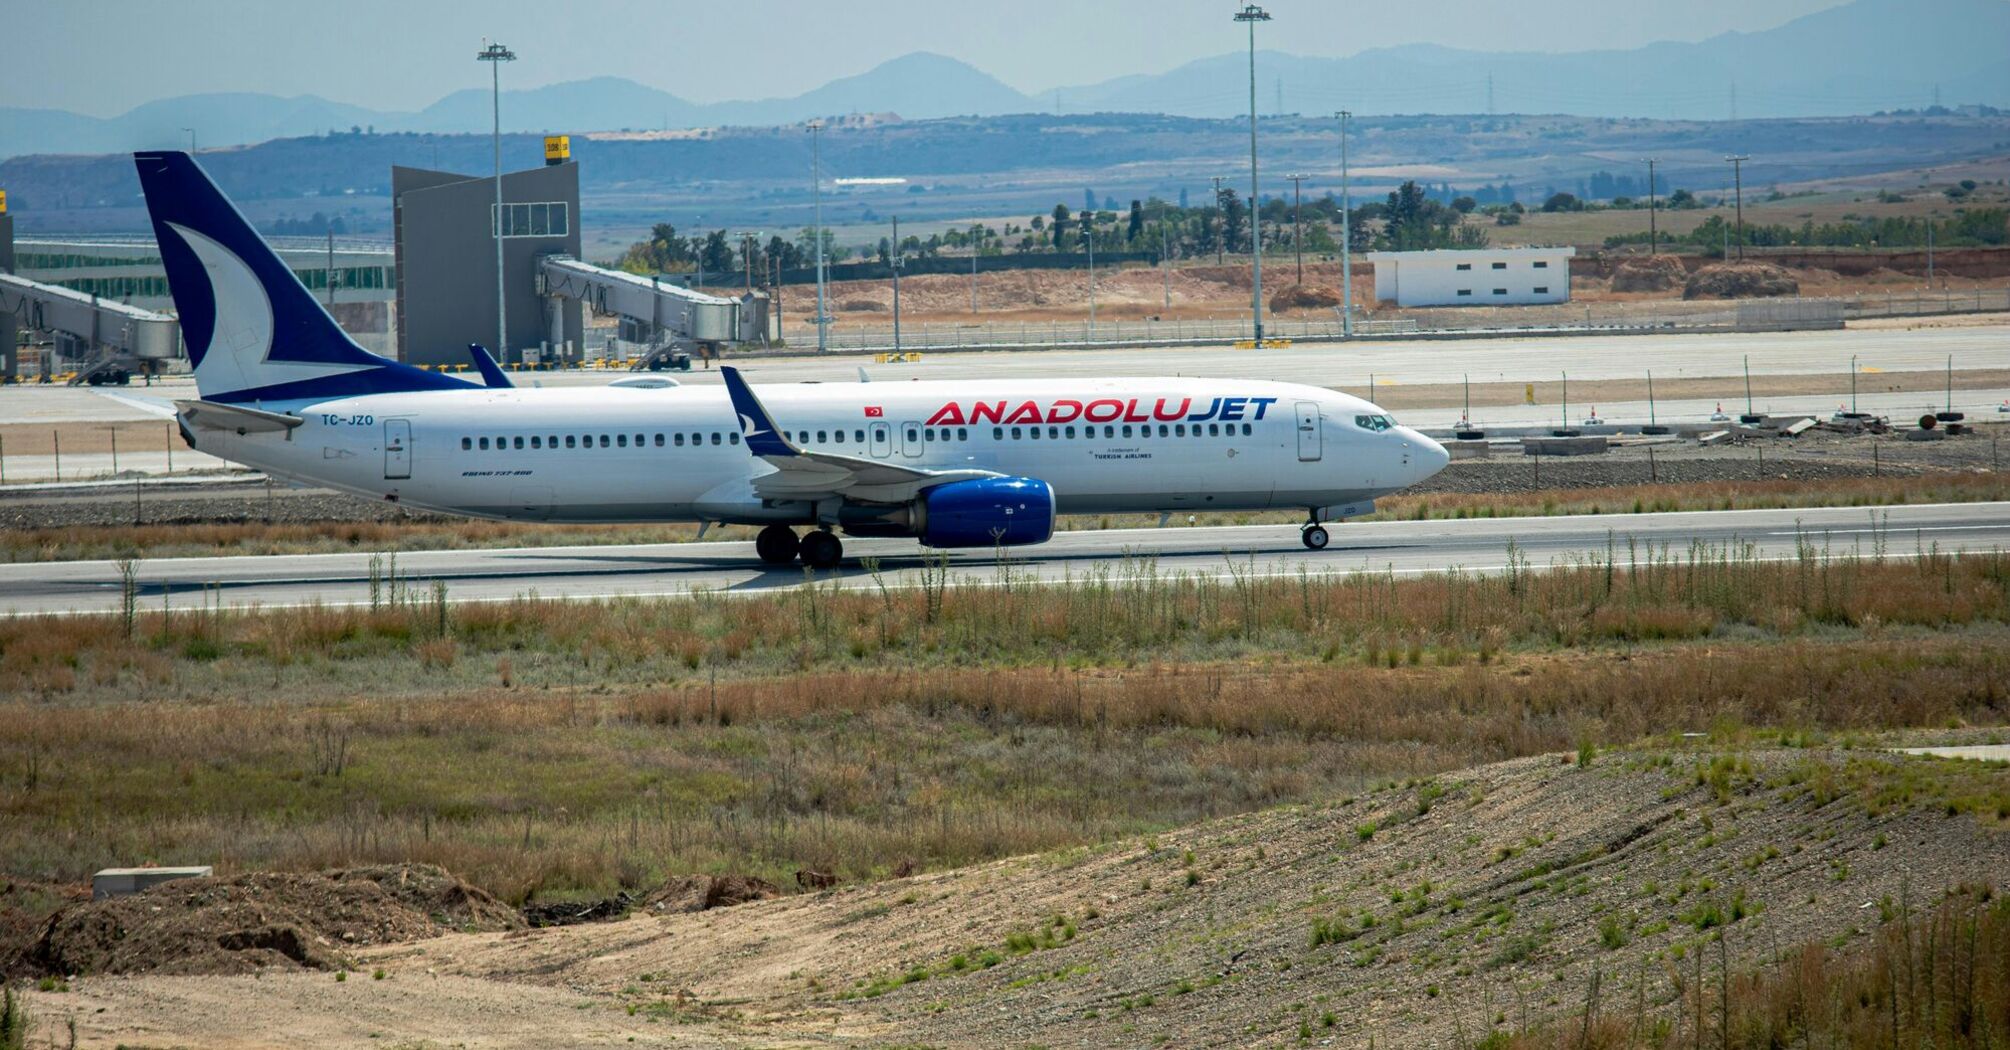 An AnadoluJet aircraft on the tarmac at an airport with airport infrastructure in the background and an open field in the foreground